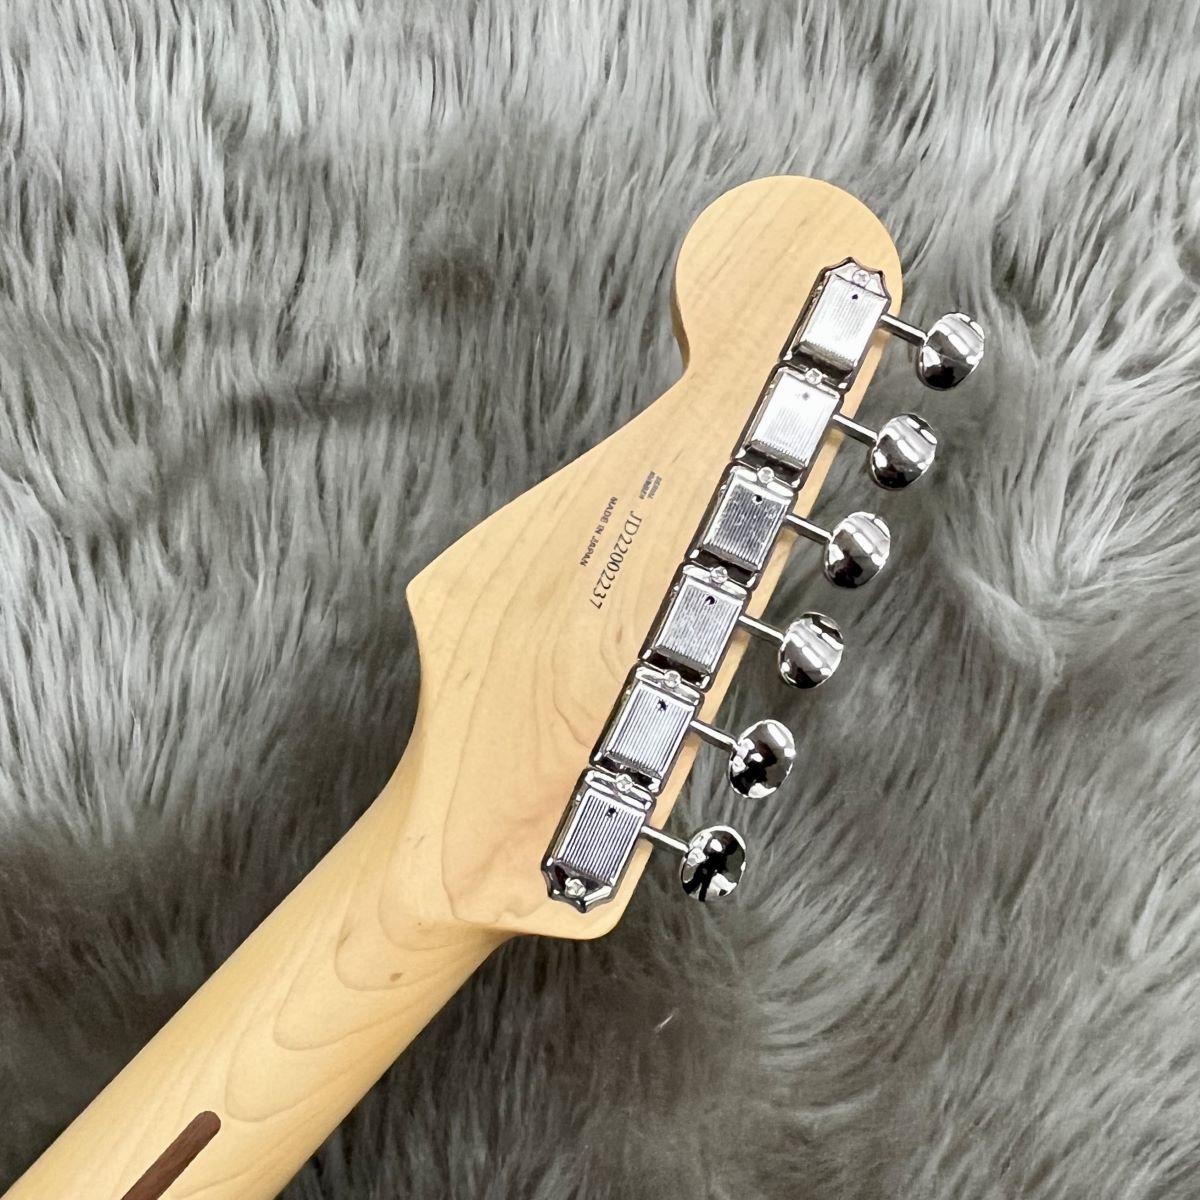 Fender Made in Japan Junior Collection Stratocaster SDNB【2.89kg】 フェンダー 【  札幌ステラプレイス店 】 | 島村楽器オンラインストア